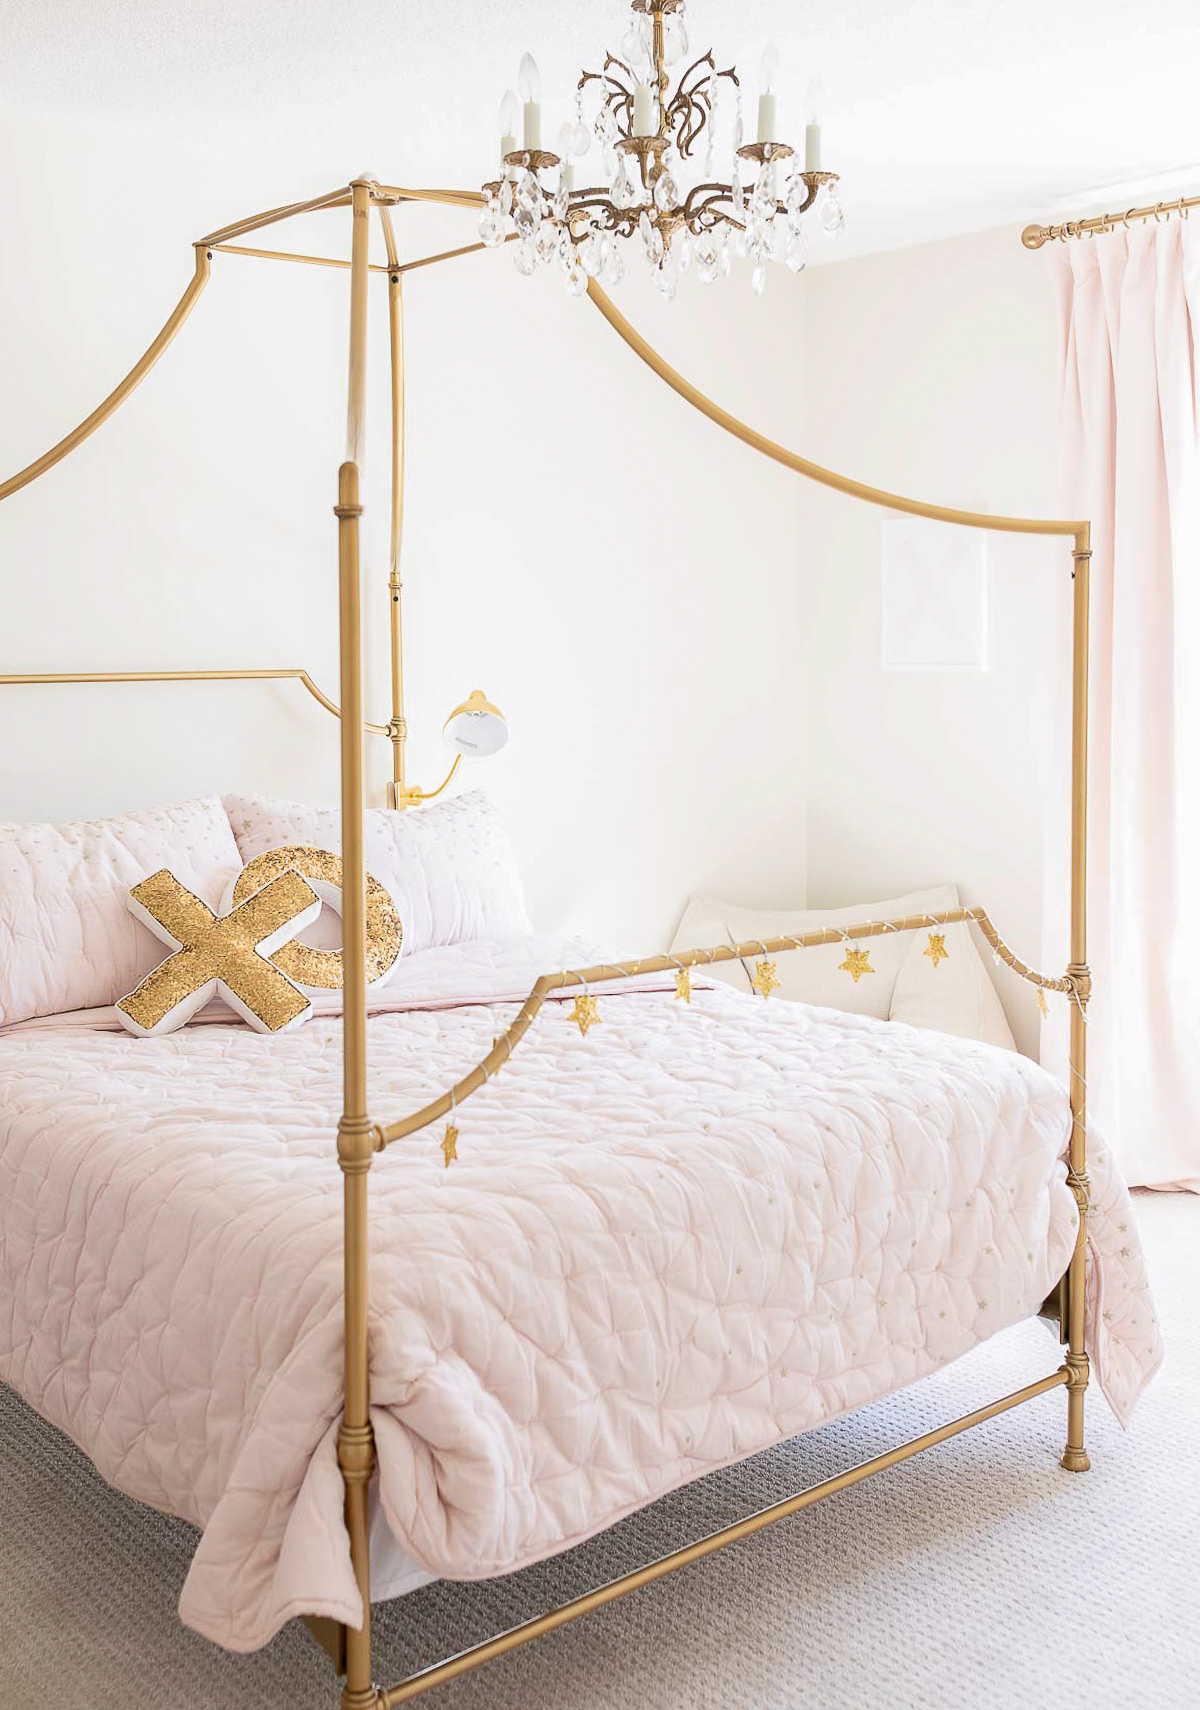 A bedroom with a gold canopy bed and pink bedding.